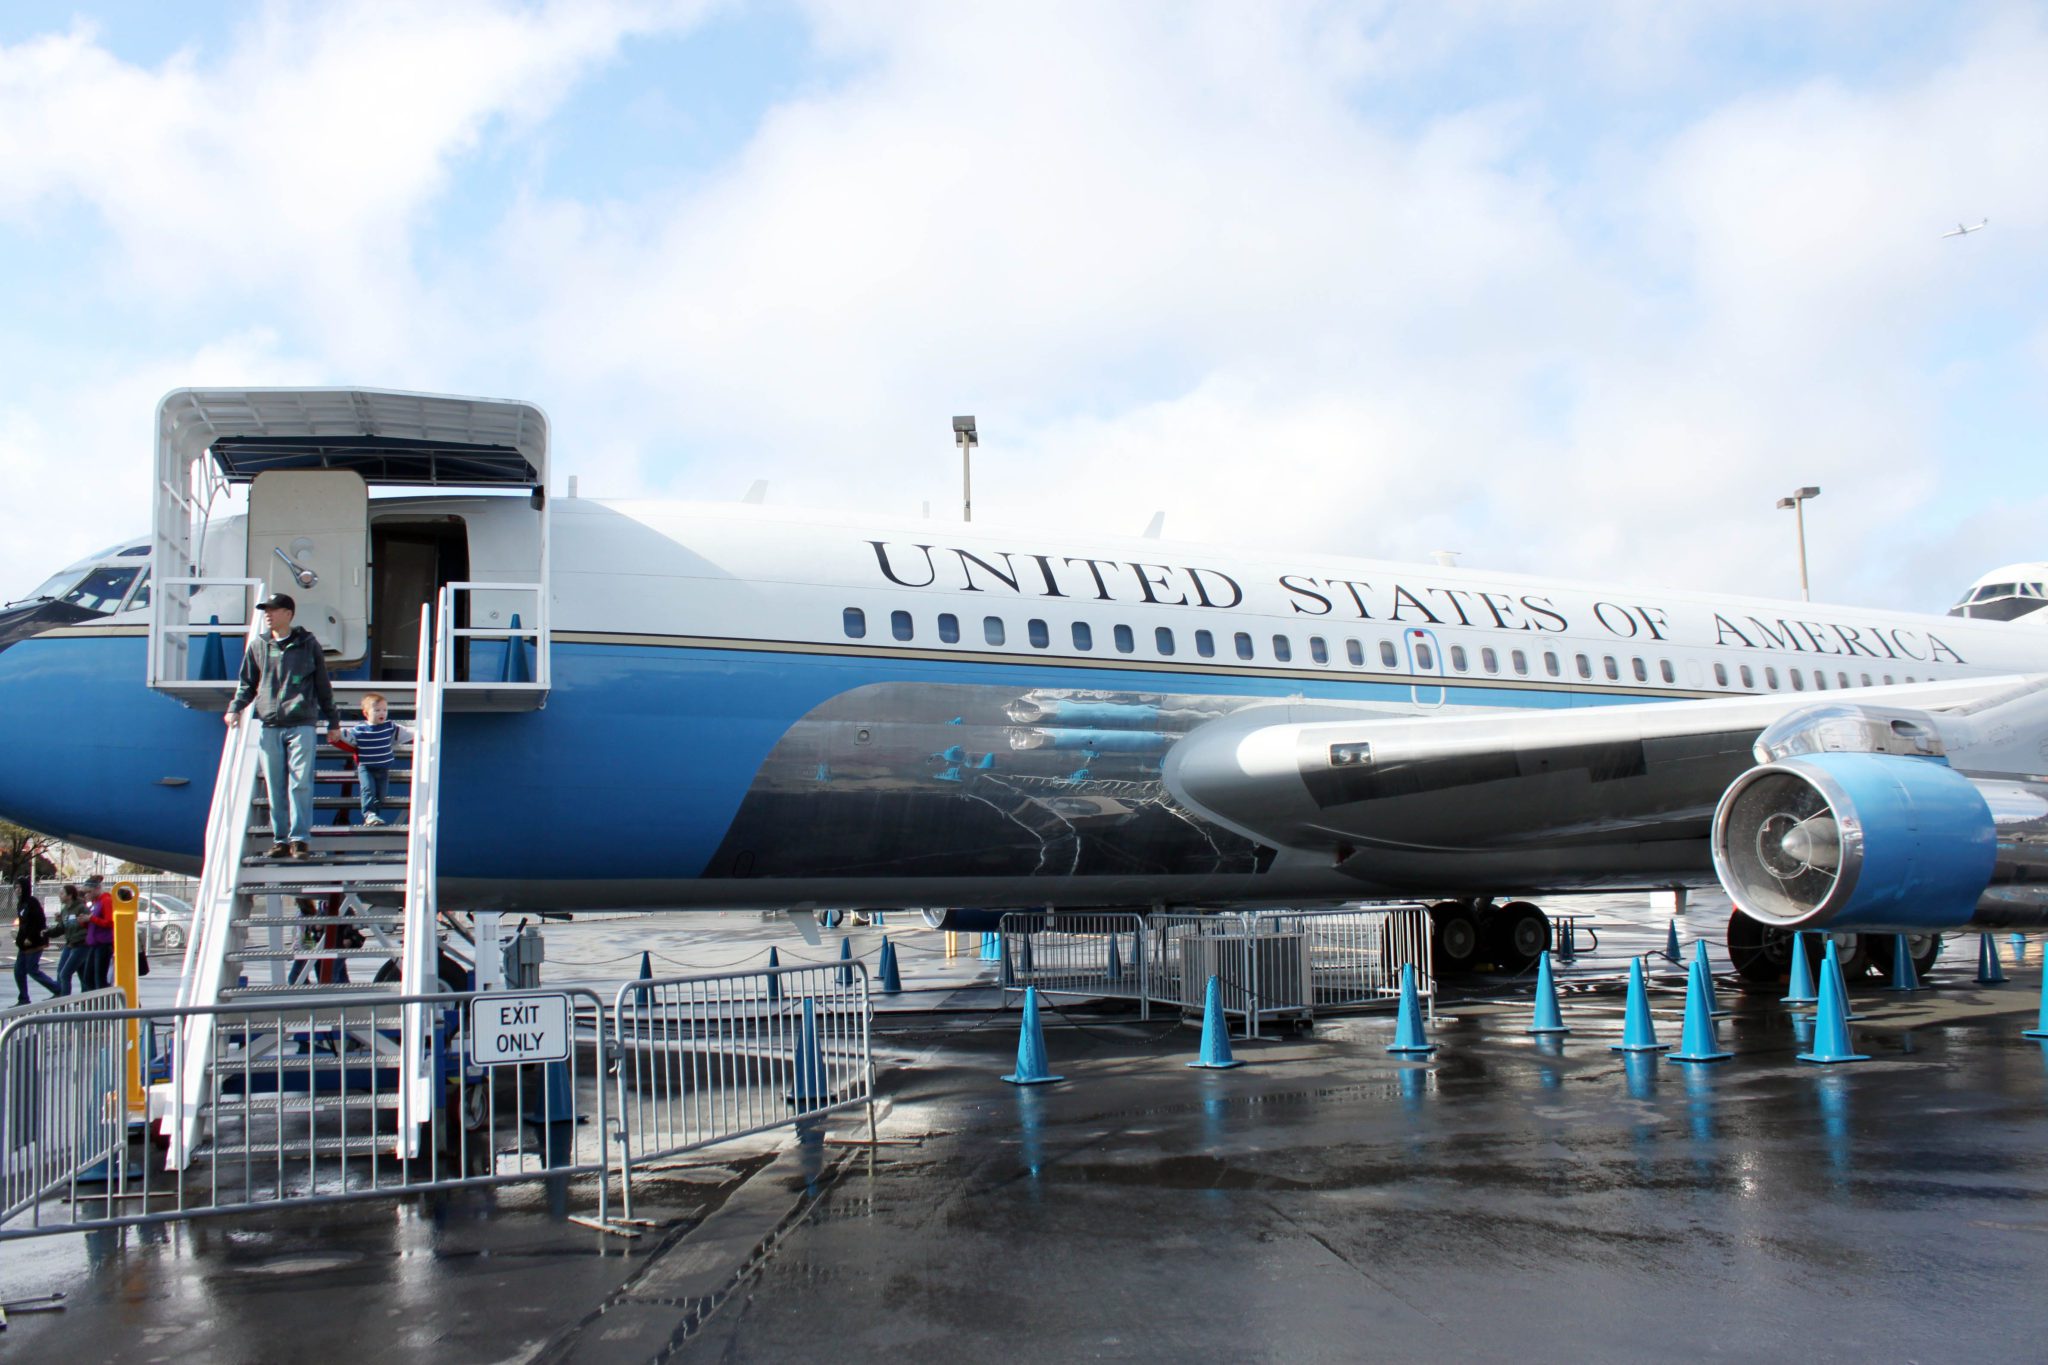 Board Air Force One at Seattle's Museum of Flight- 10 things to do in Seattle with kids #Seattle #washington #museumofflight